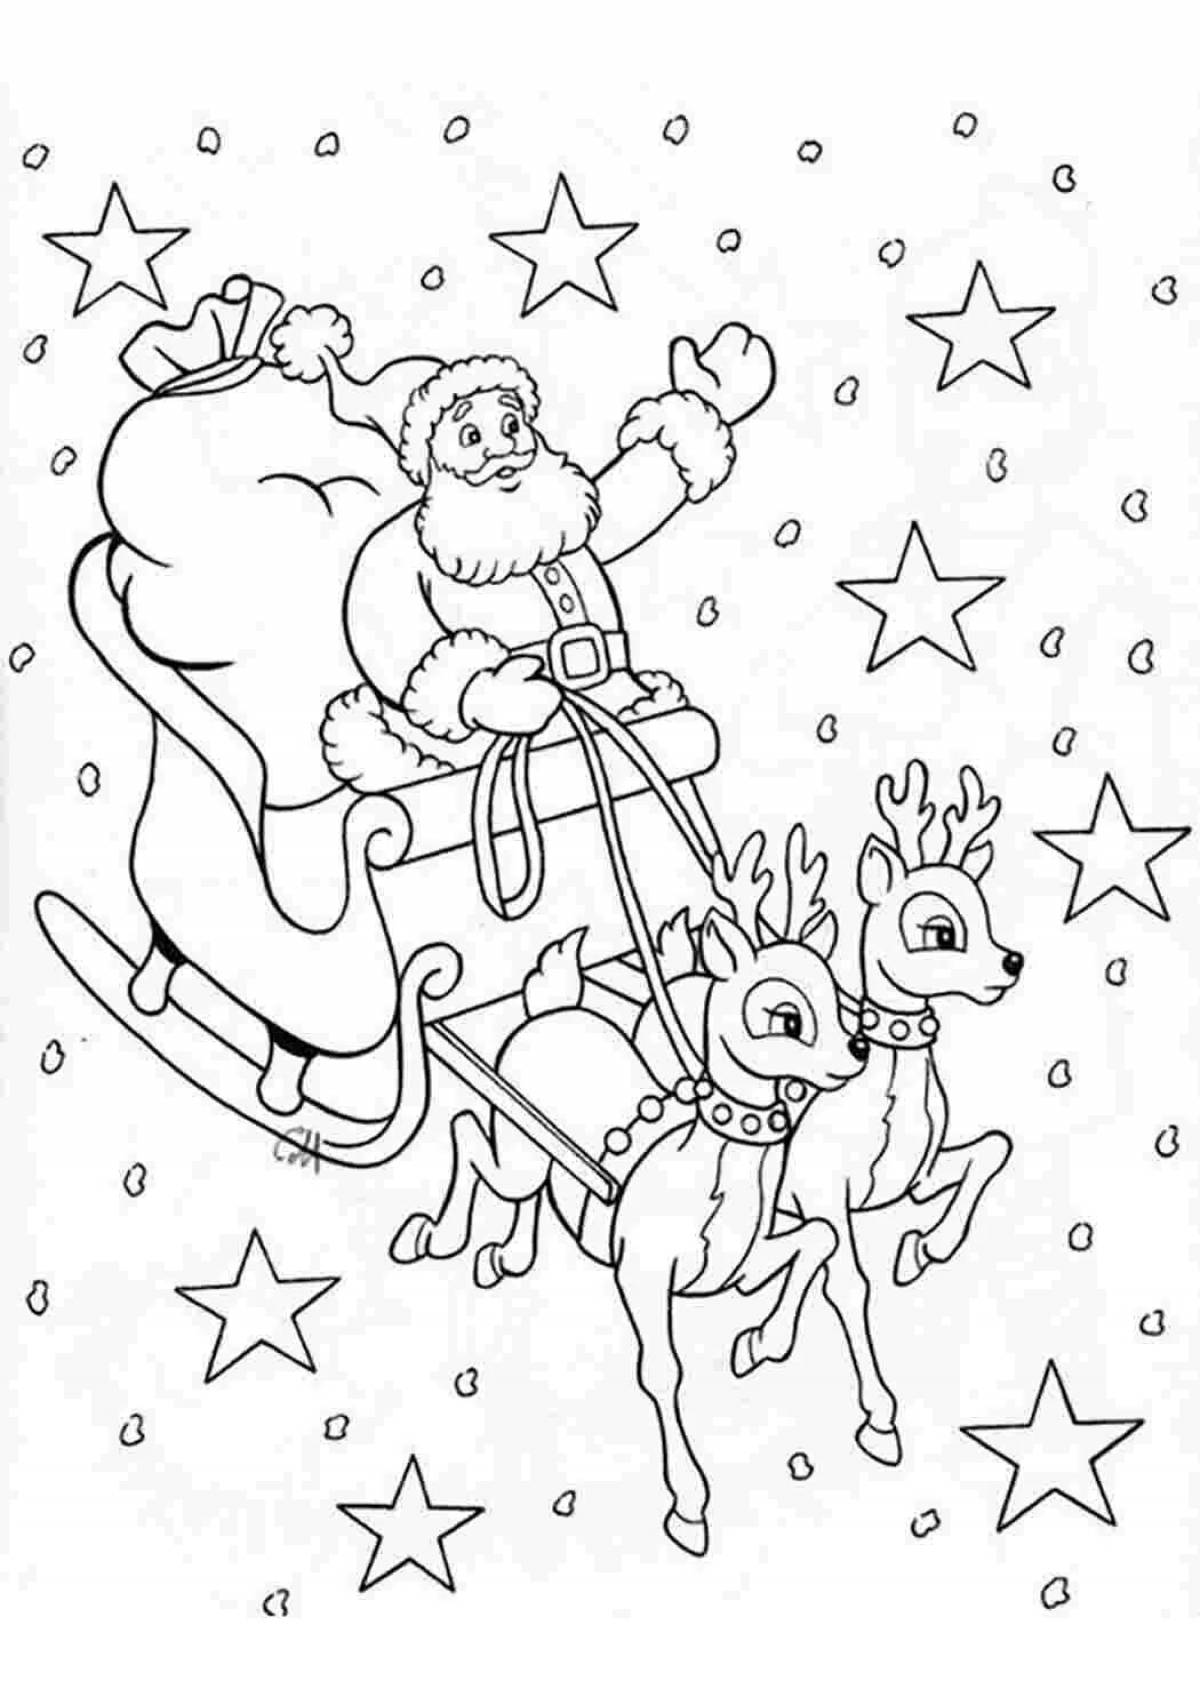 Glowing Christmas miracle coloring book